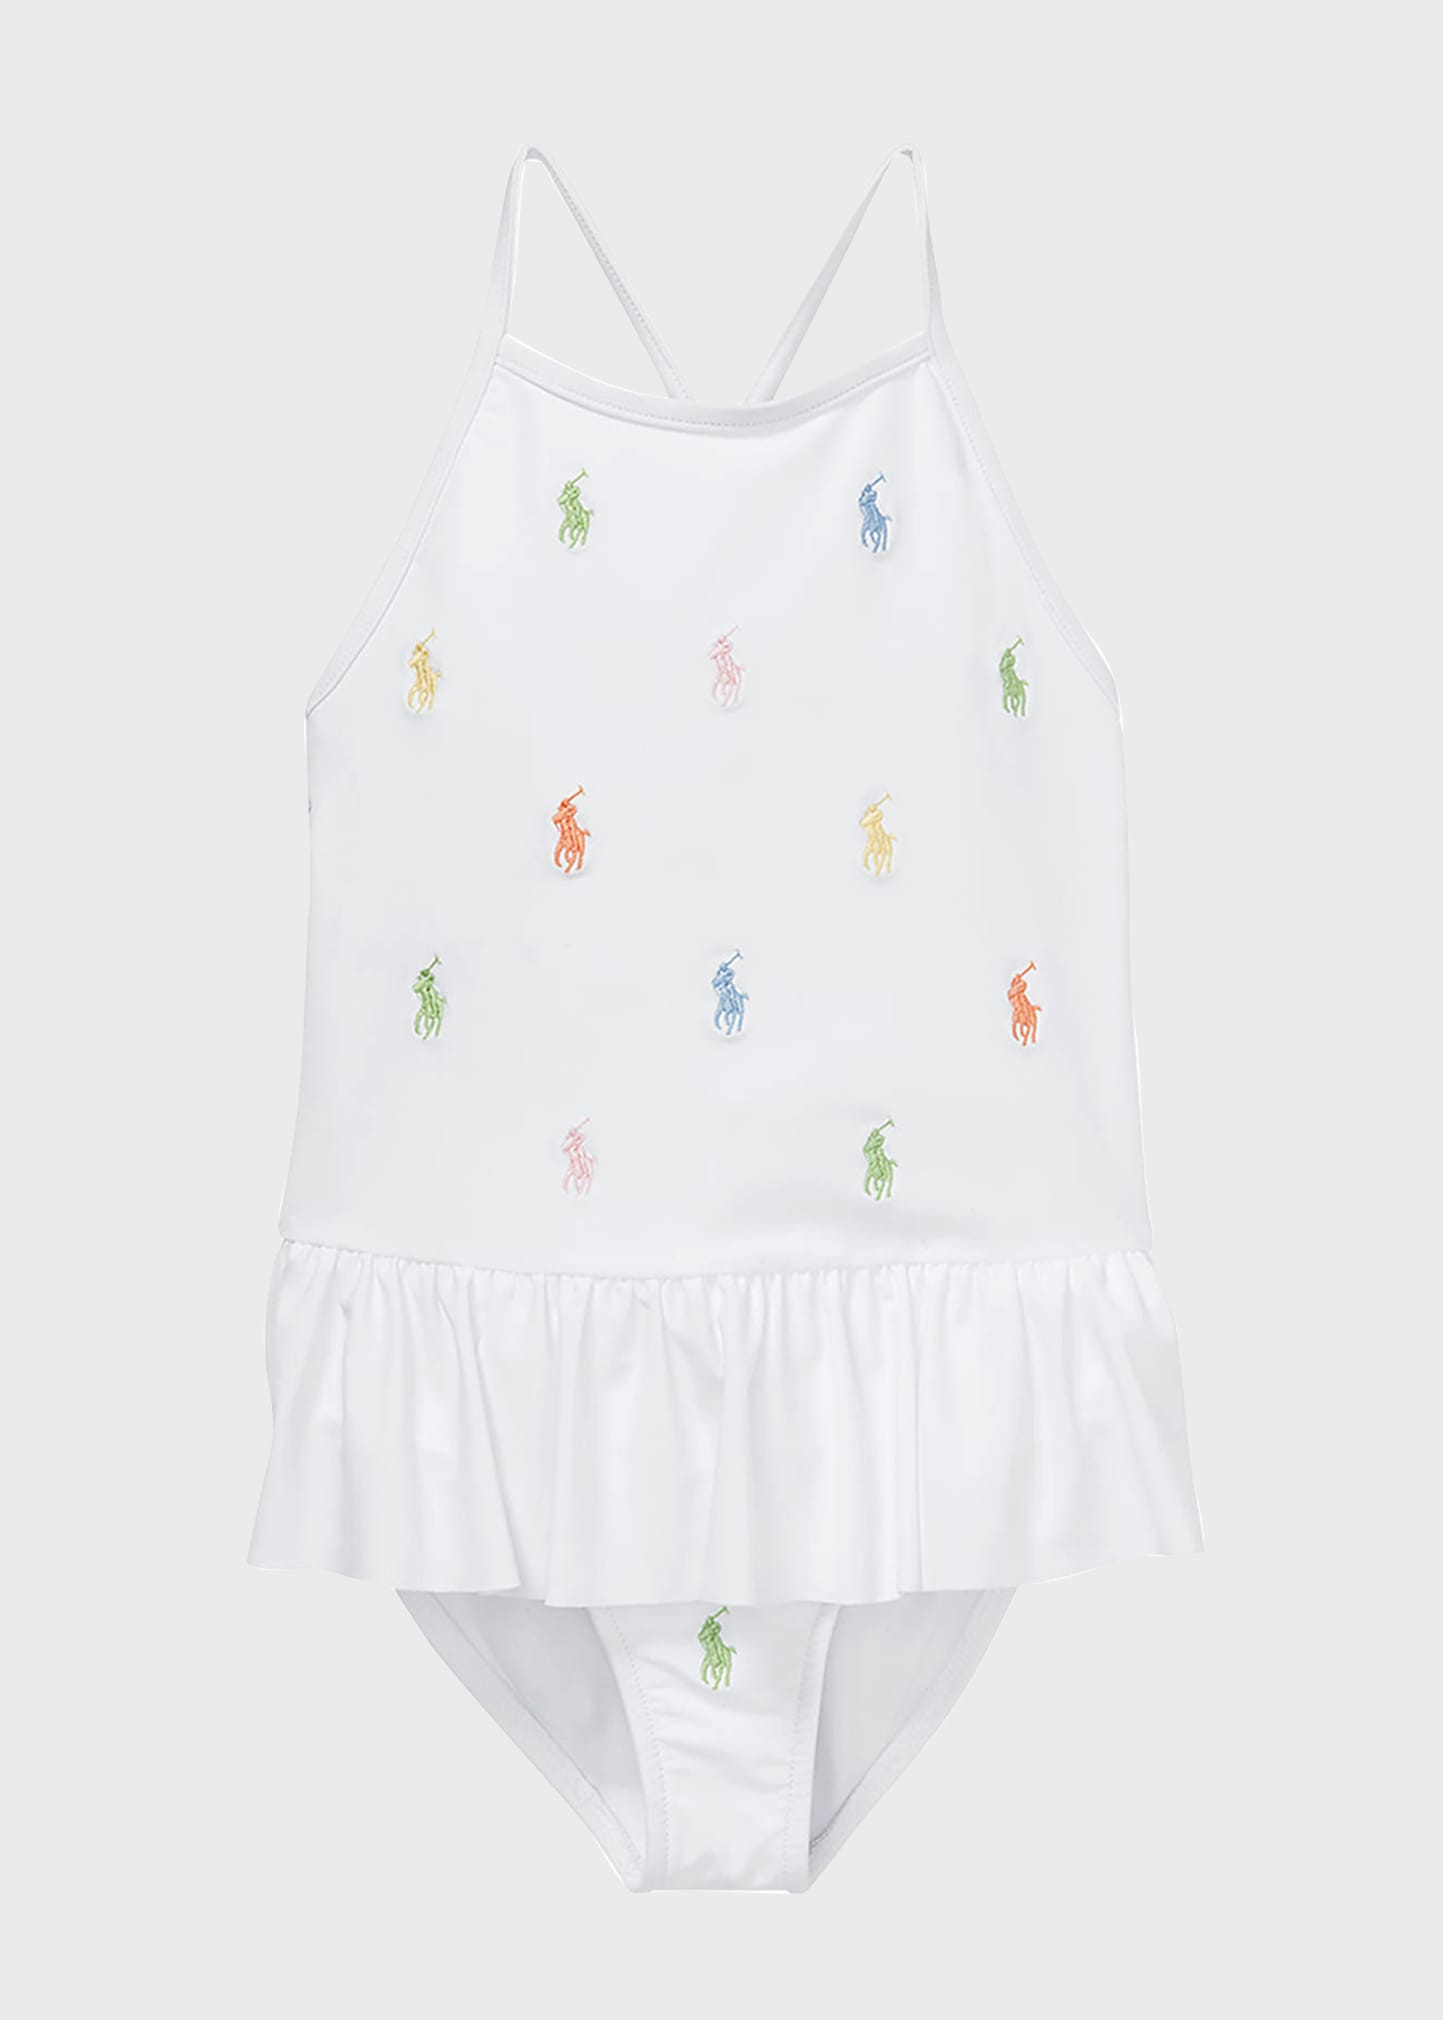 RALPH LAUREN GIRL'S MULTICOLOR LOGO EMBROIDERED ONE-PIECE SWIMSUIT